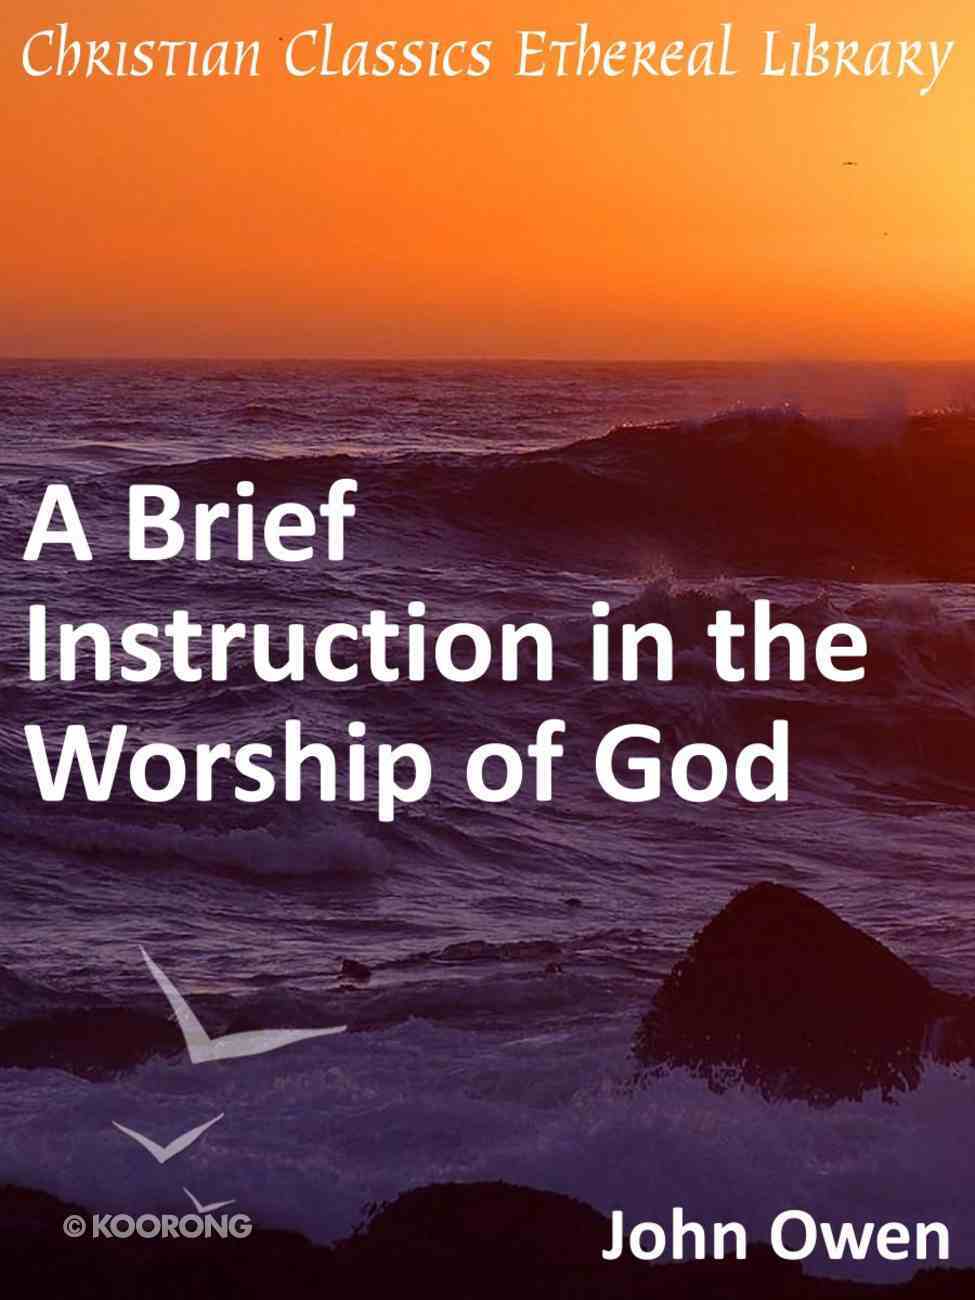 DOWNLOAD PDF: Brief Instruction in the Worship of God by John Owen 18